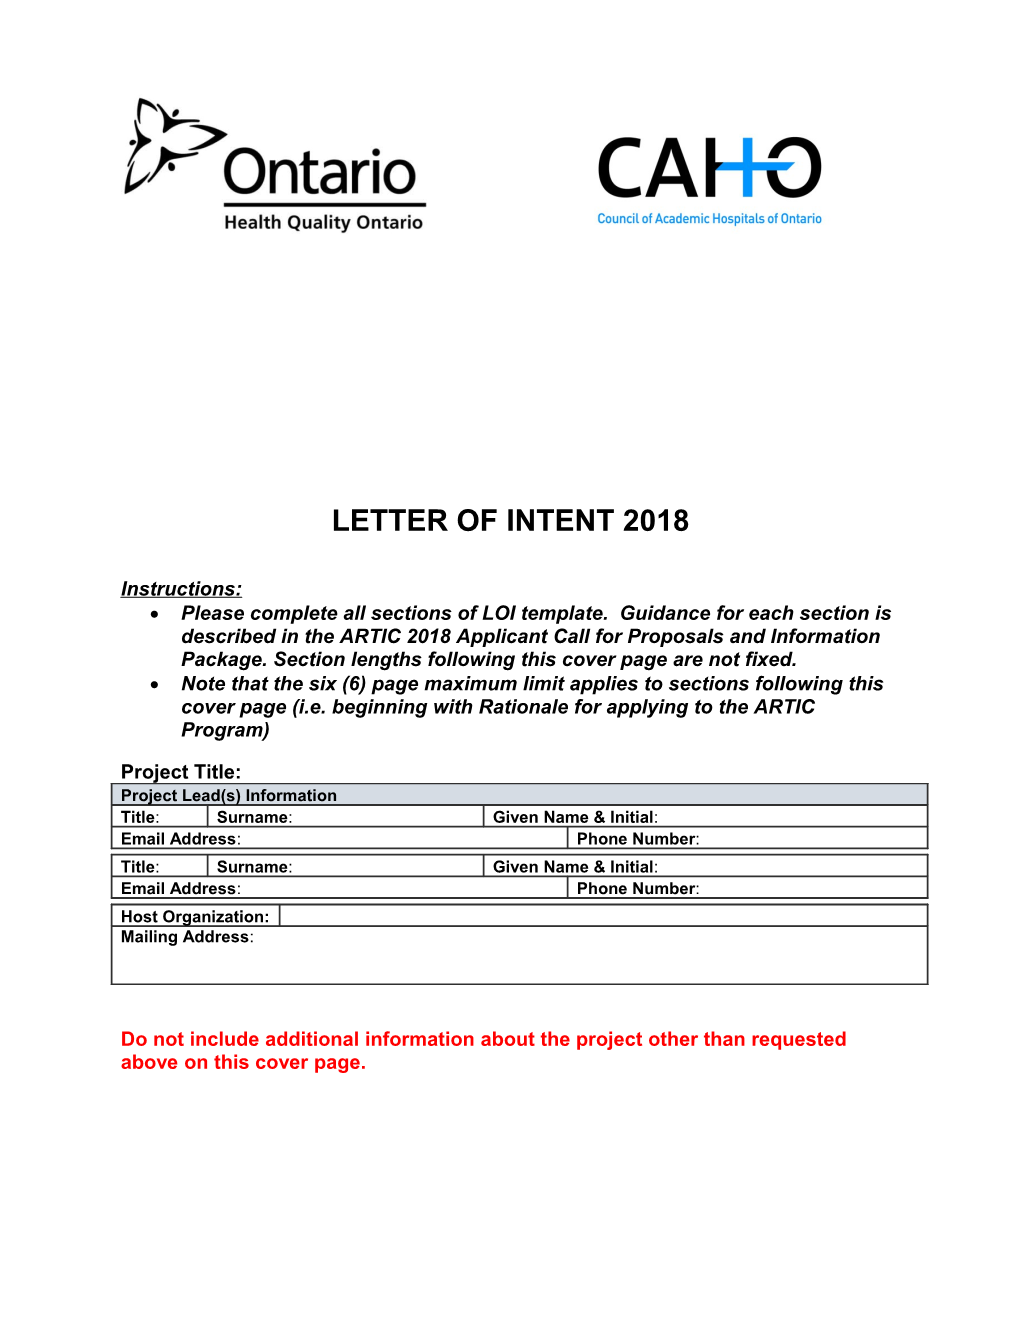 Adopting Research to Improve Care Program LETTER of INTENT 2018